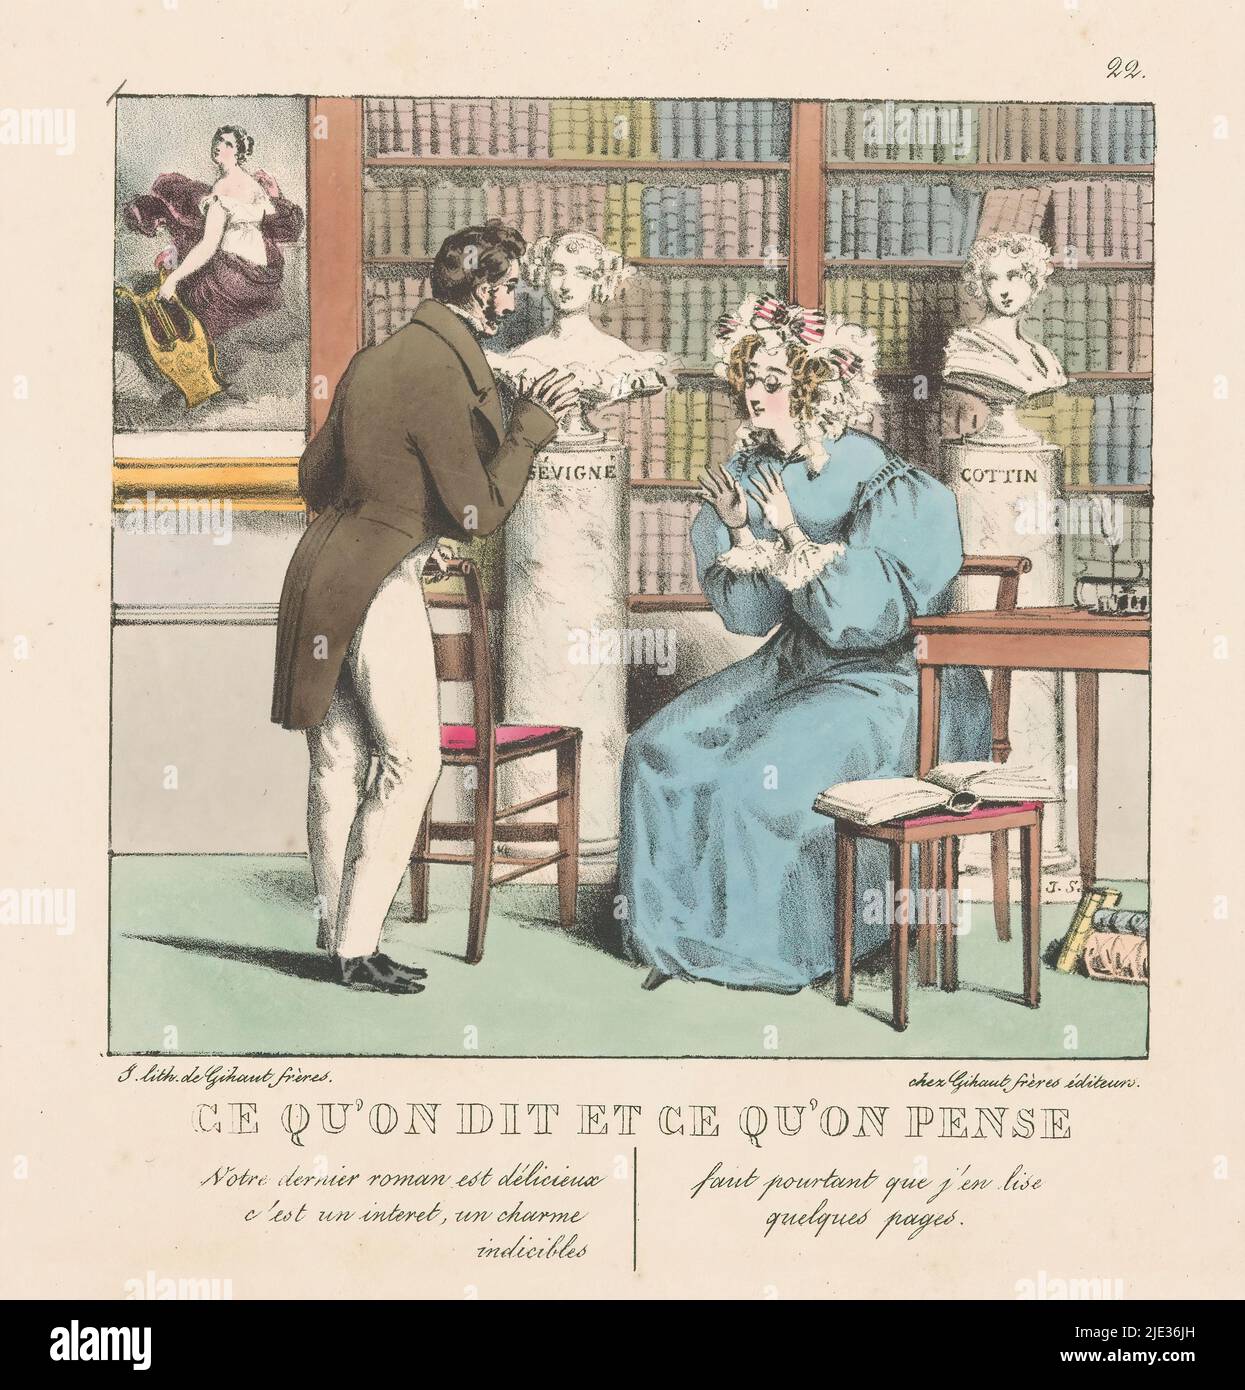 Man in conversation with a French writer, What people say and what they think (series title), Ce qu'on dit et ce qu'on pense (series title on object), In front of the bookcase are busts of the writers Madame de Sévigné and Sophie Ristaud Cottin., print maker: Jean Gabriel Scheffer, (mentioned on object), printer: Gihaut frères, (mentioned on object), publisher: Gihaut frères, (mentioned on object), Paris, 1829, paper, height 223 mm × width 264 mm Stock Photo